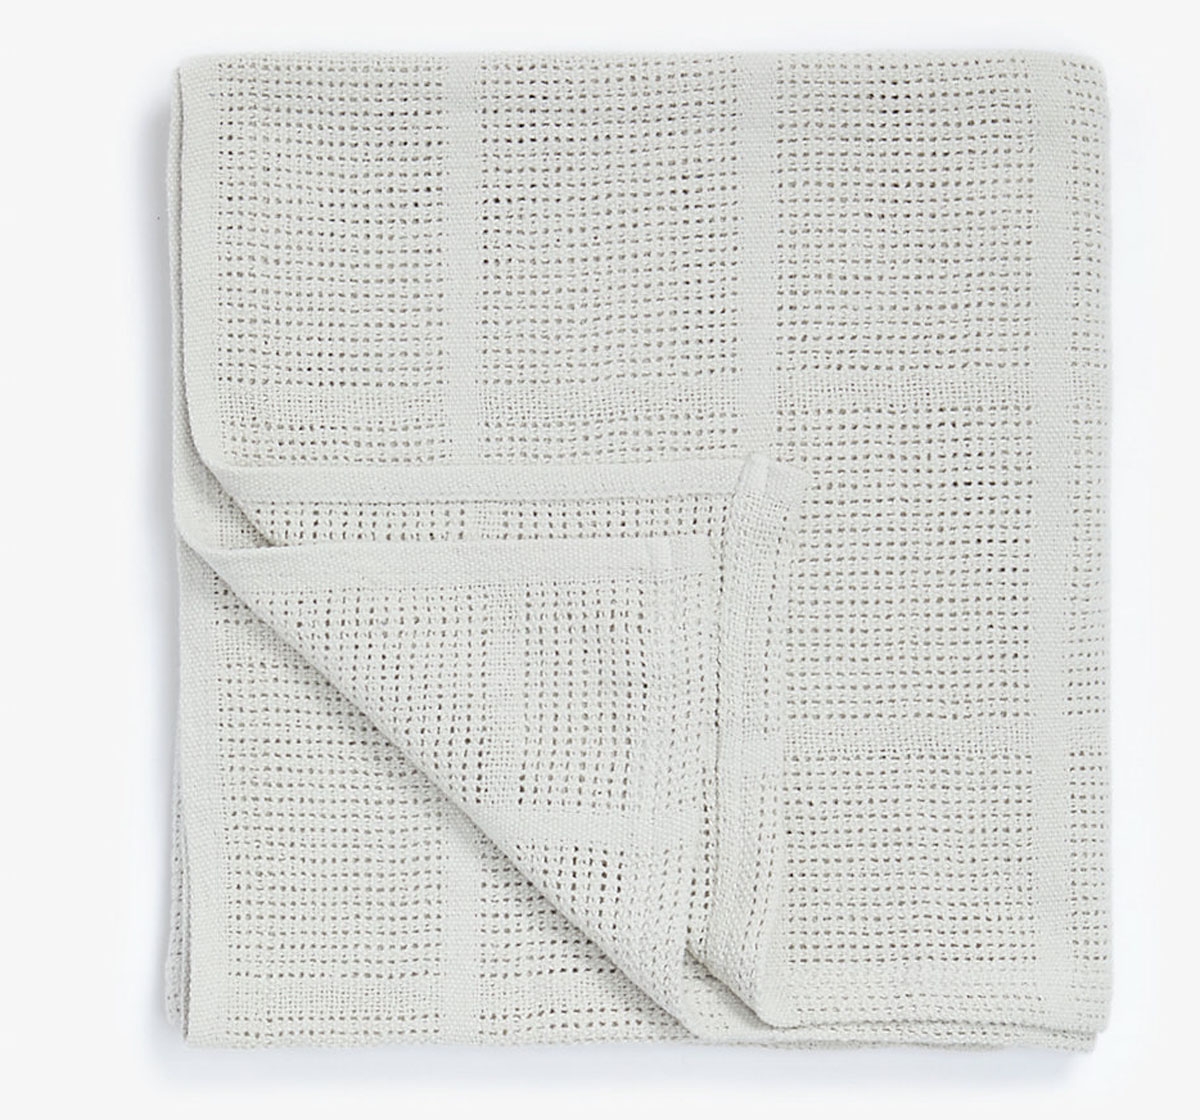 Mothercare | MOTHERCARE GREY ESSENTIALS COTBED CELLULAR BLANKET